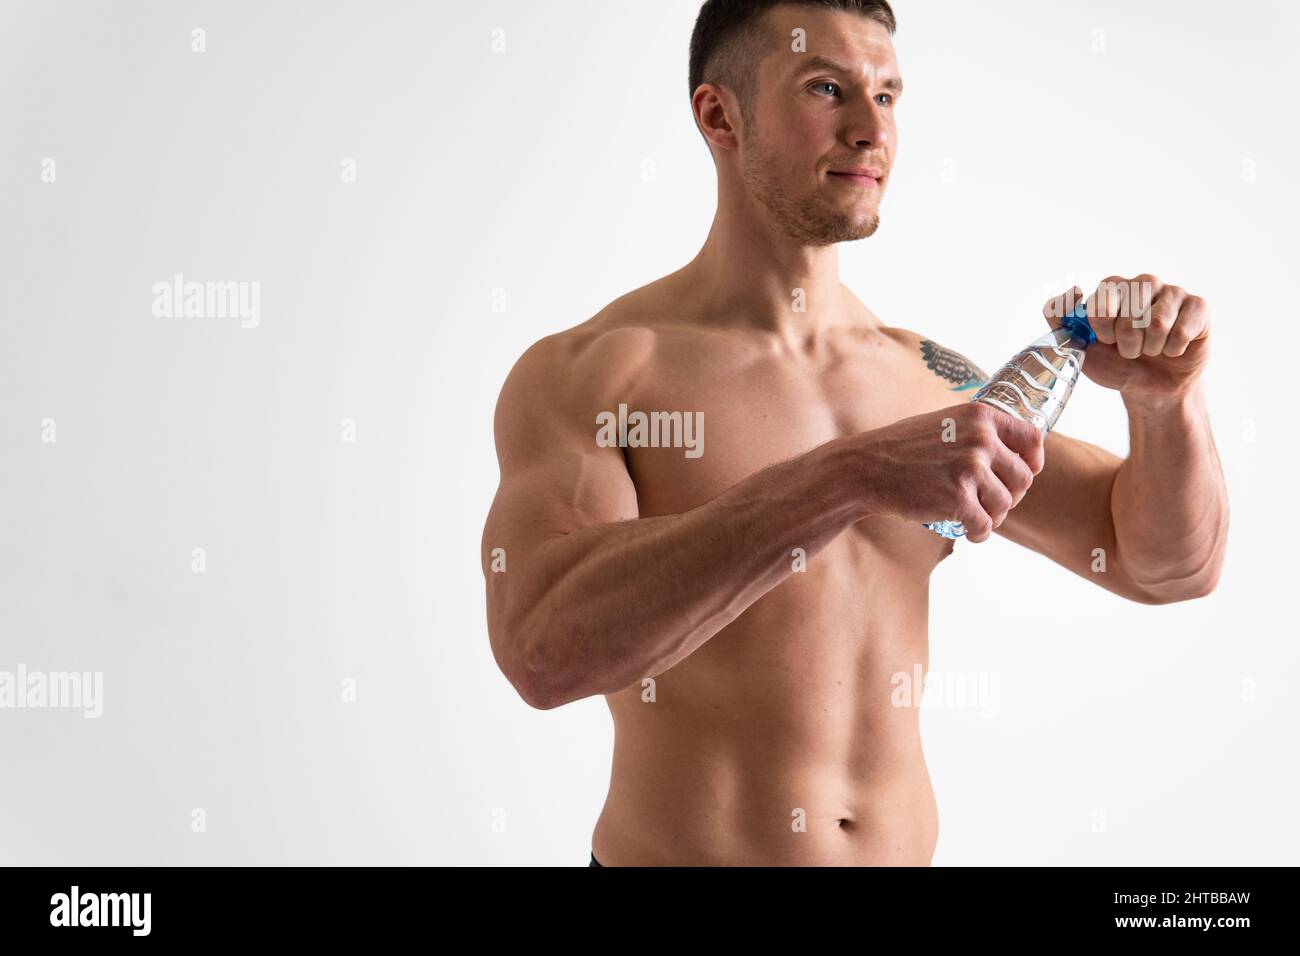 Male drink-water fitness is pumped with a towel on a white background isolated fit lifestyle, training exercise male holding, background cardio Stock Photo